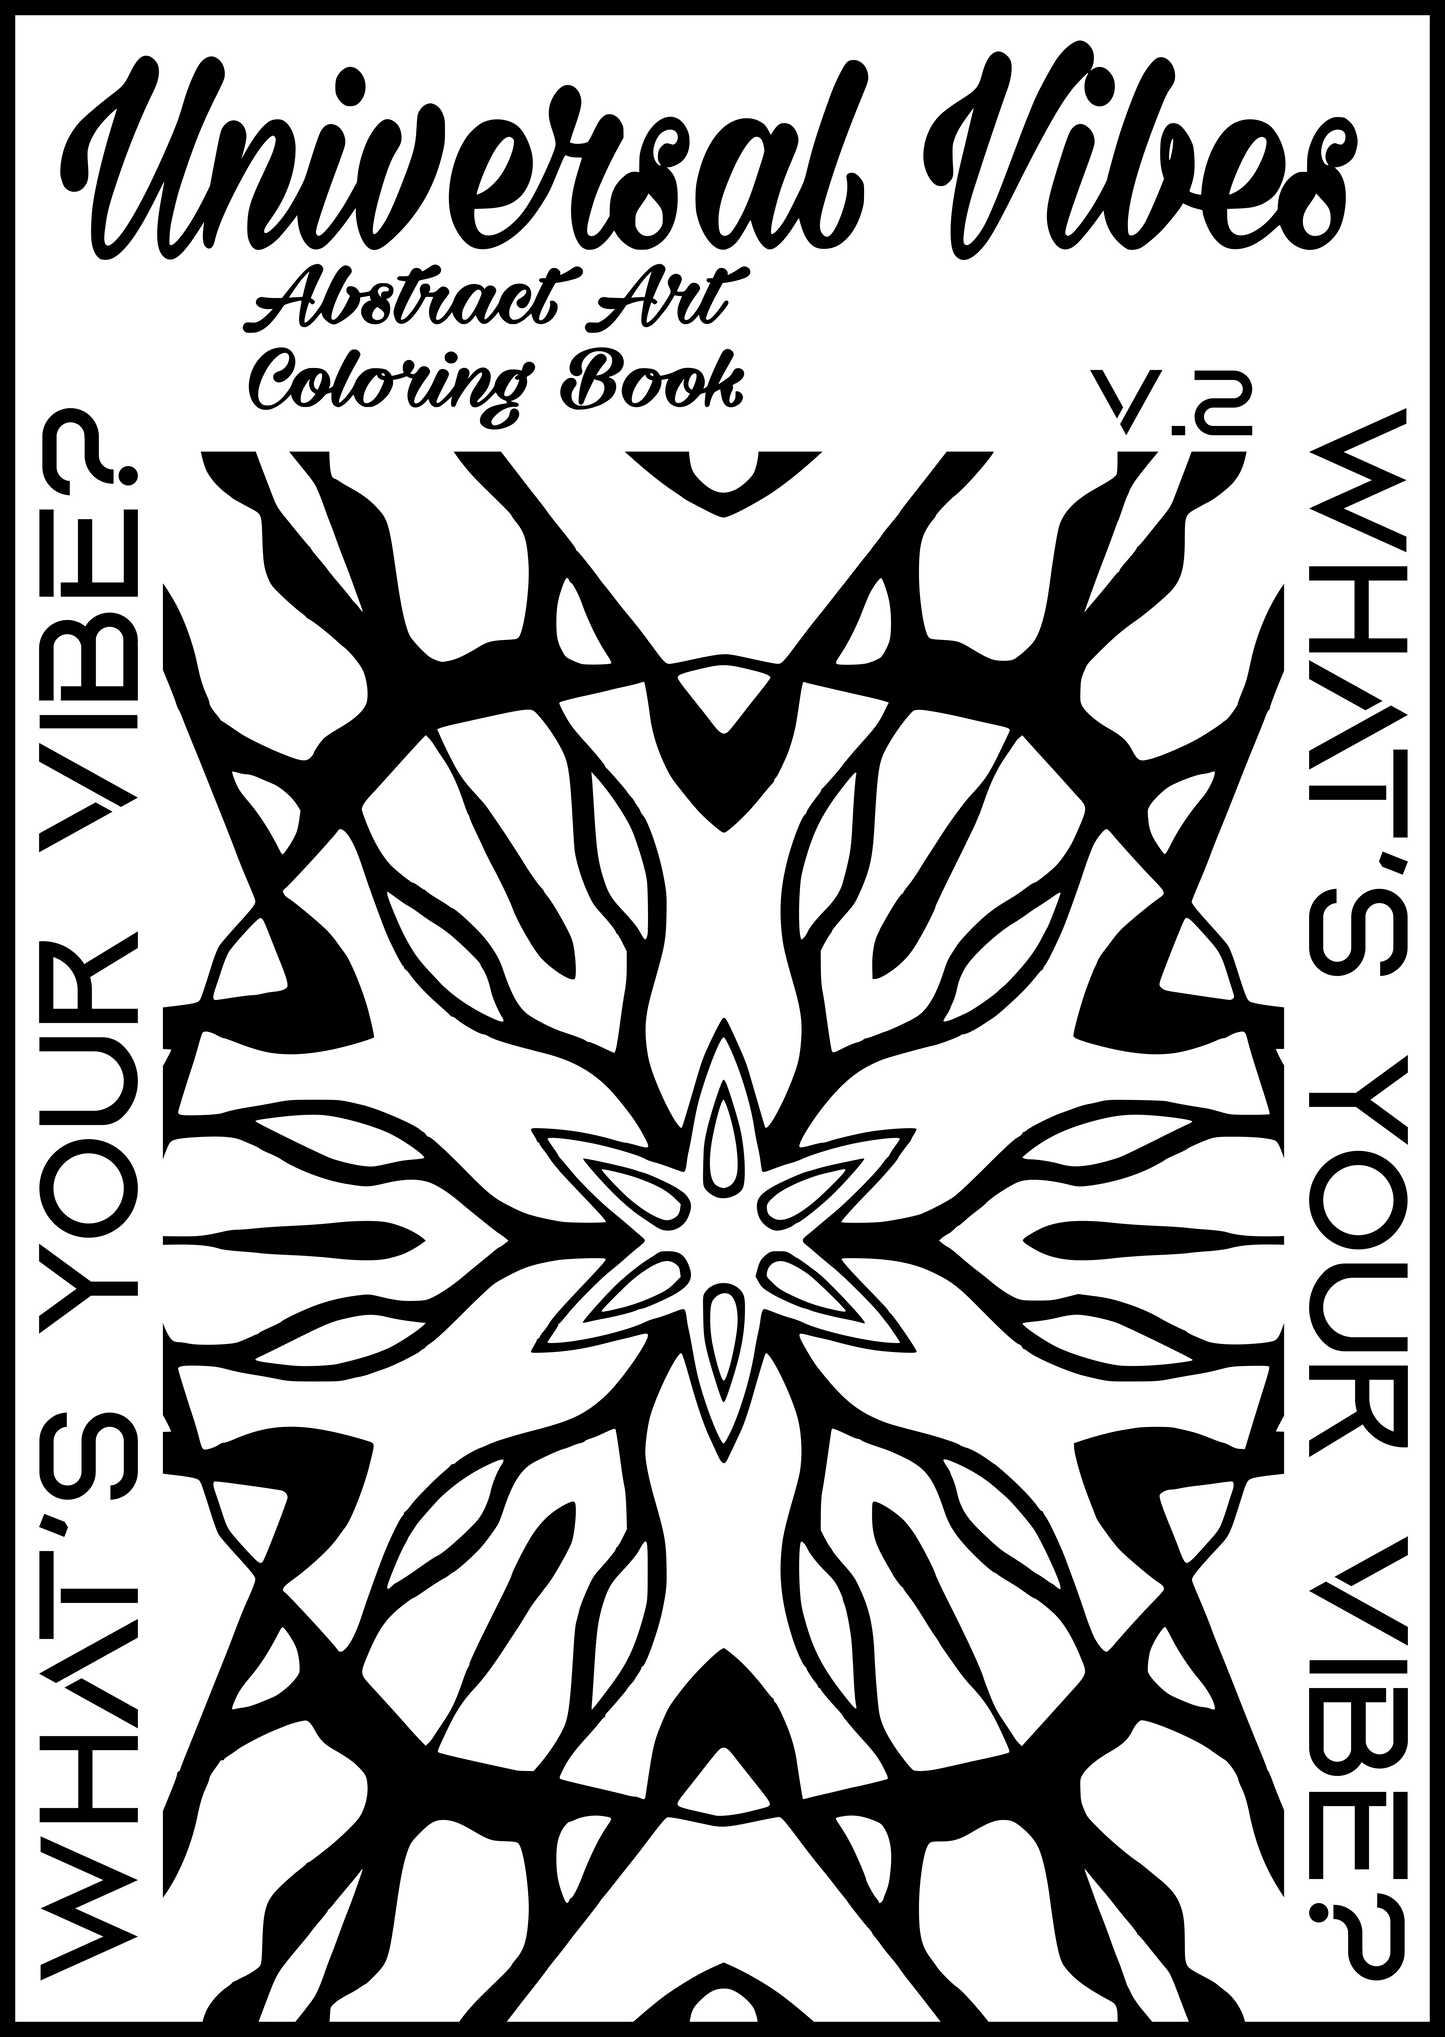 Universal Vibes Abstract Art Coloring Book! V.2